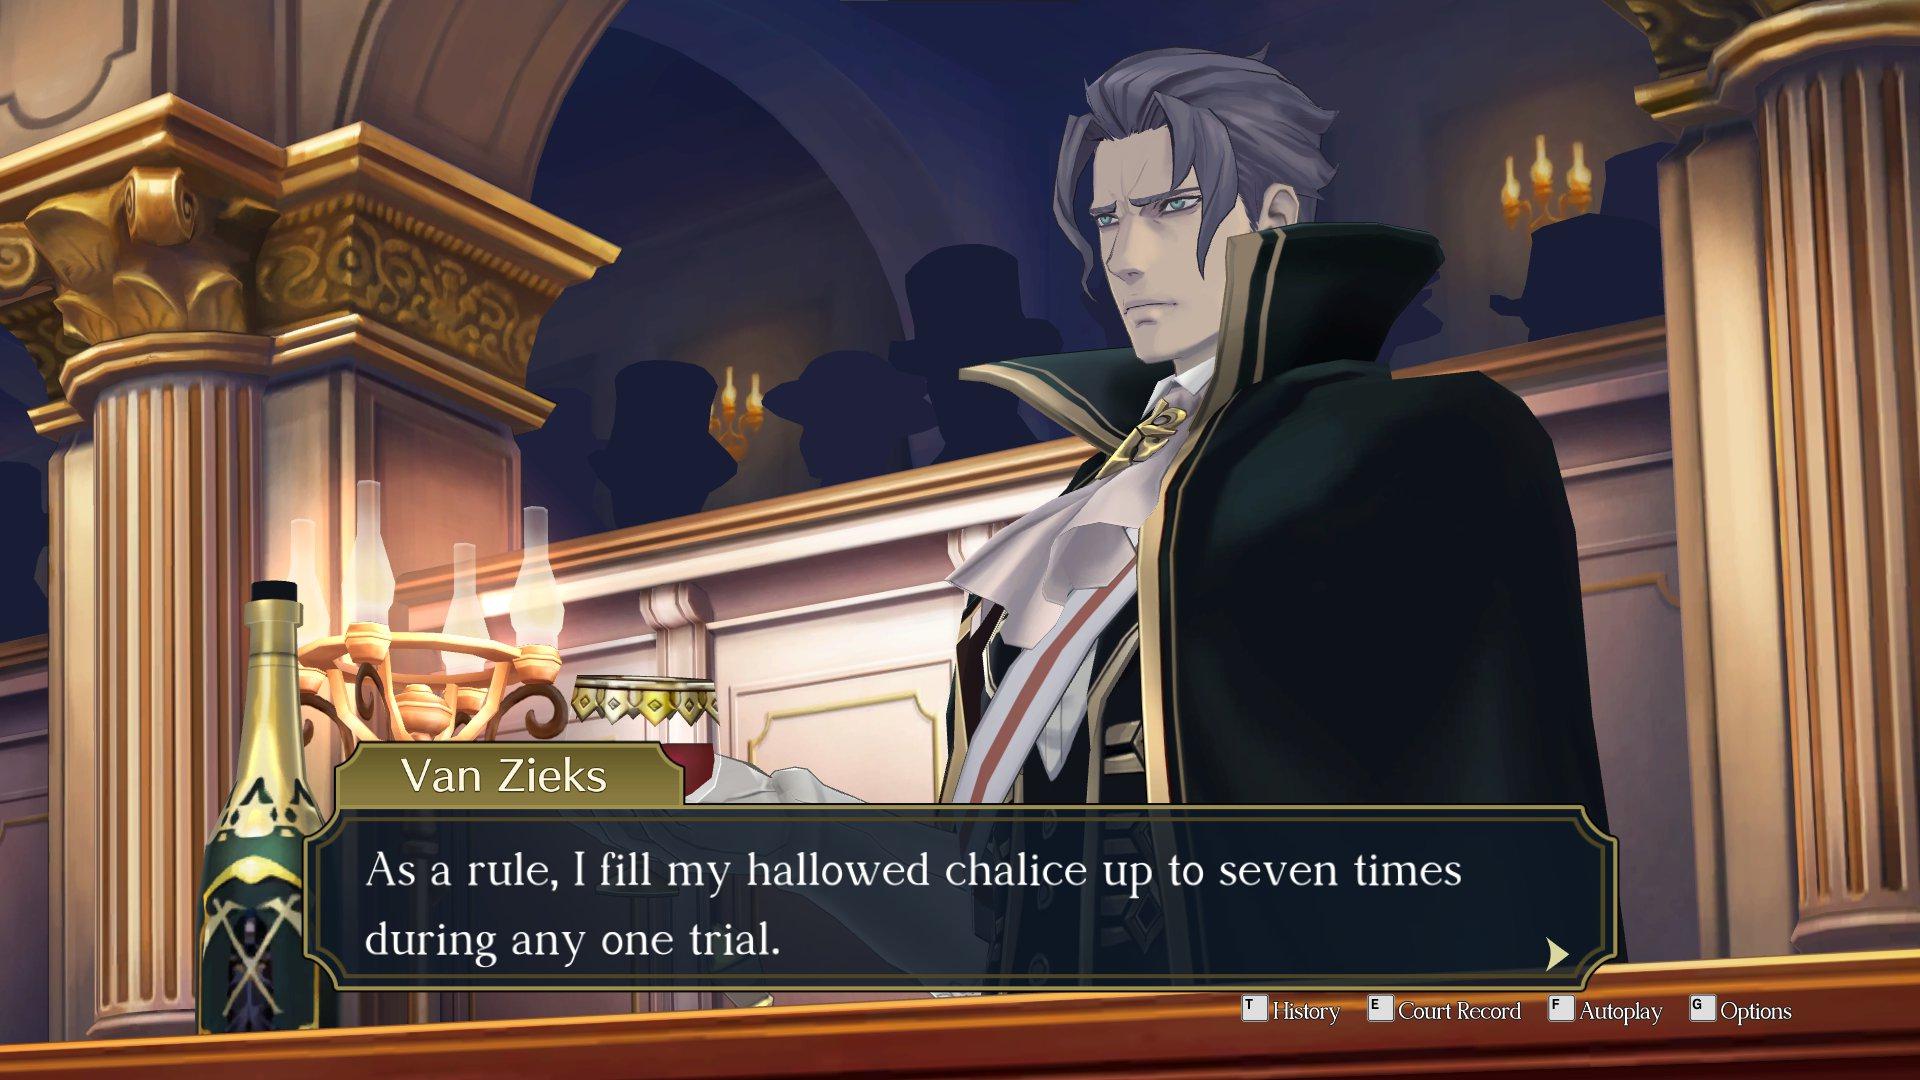 Lord Van Zieks in court saying As a rule, I fill my hallowed chalice up to seven times during any one trial.